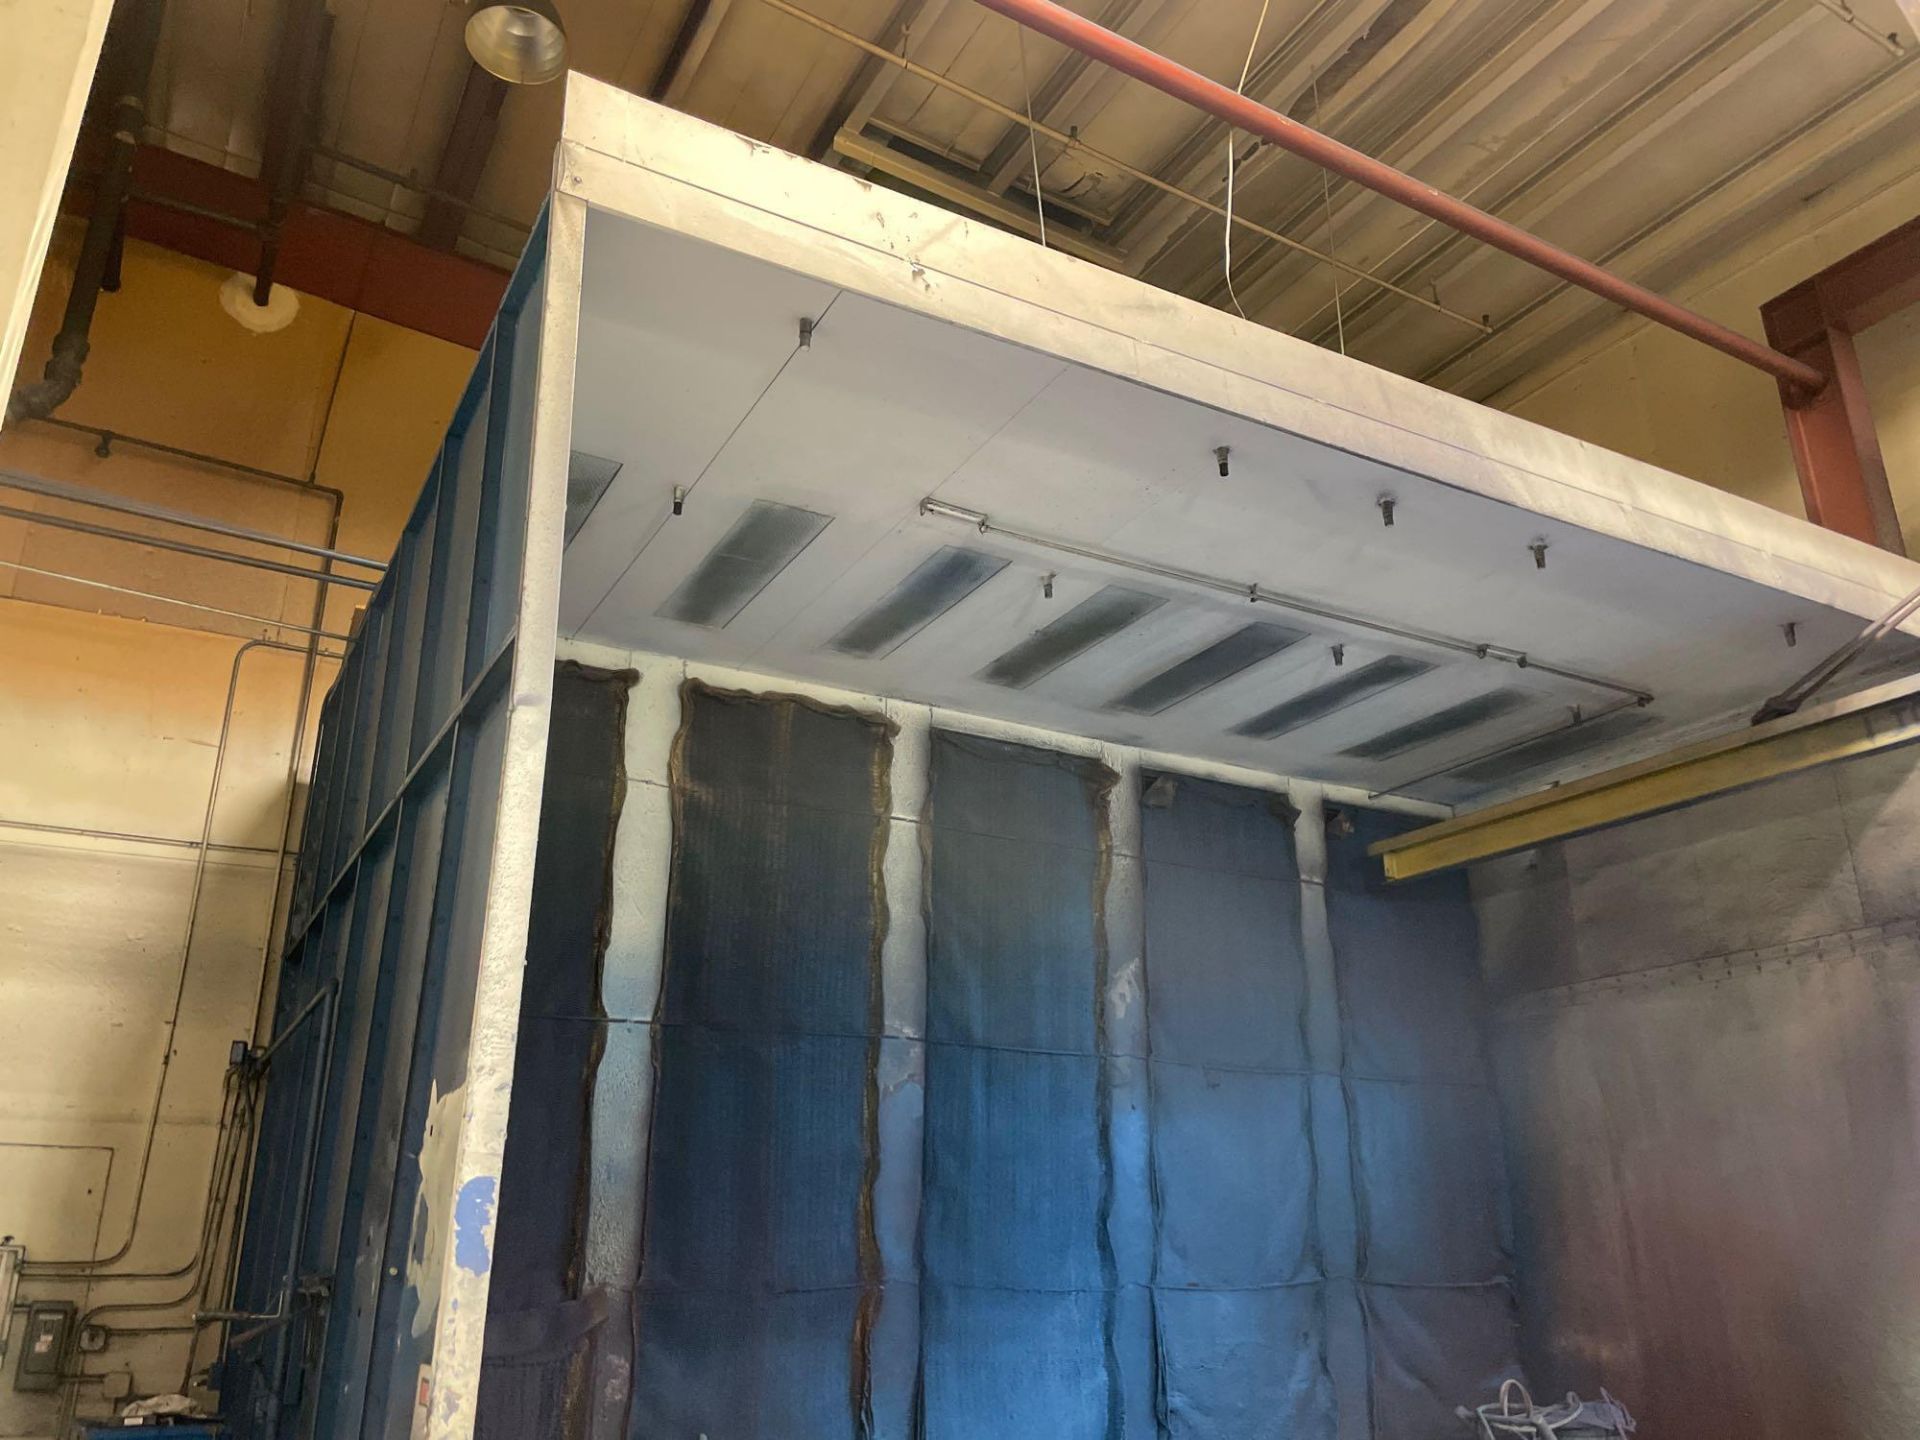 Paint booth "A" - enclosed with pull thru filter